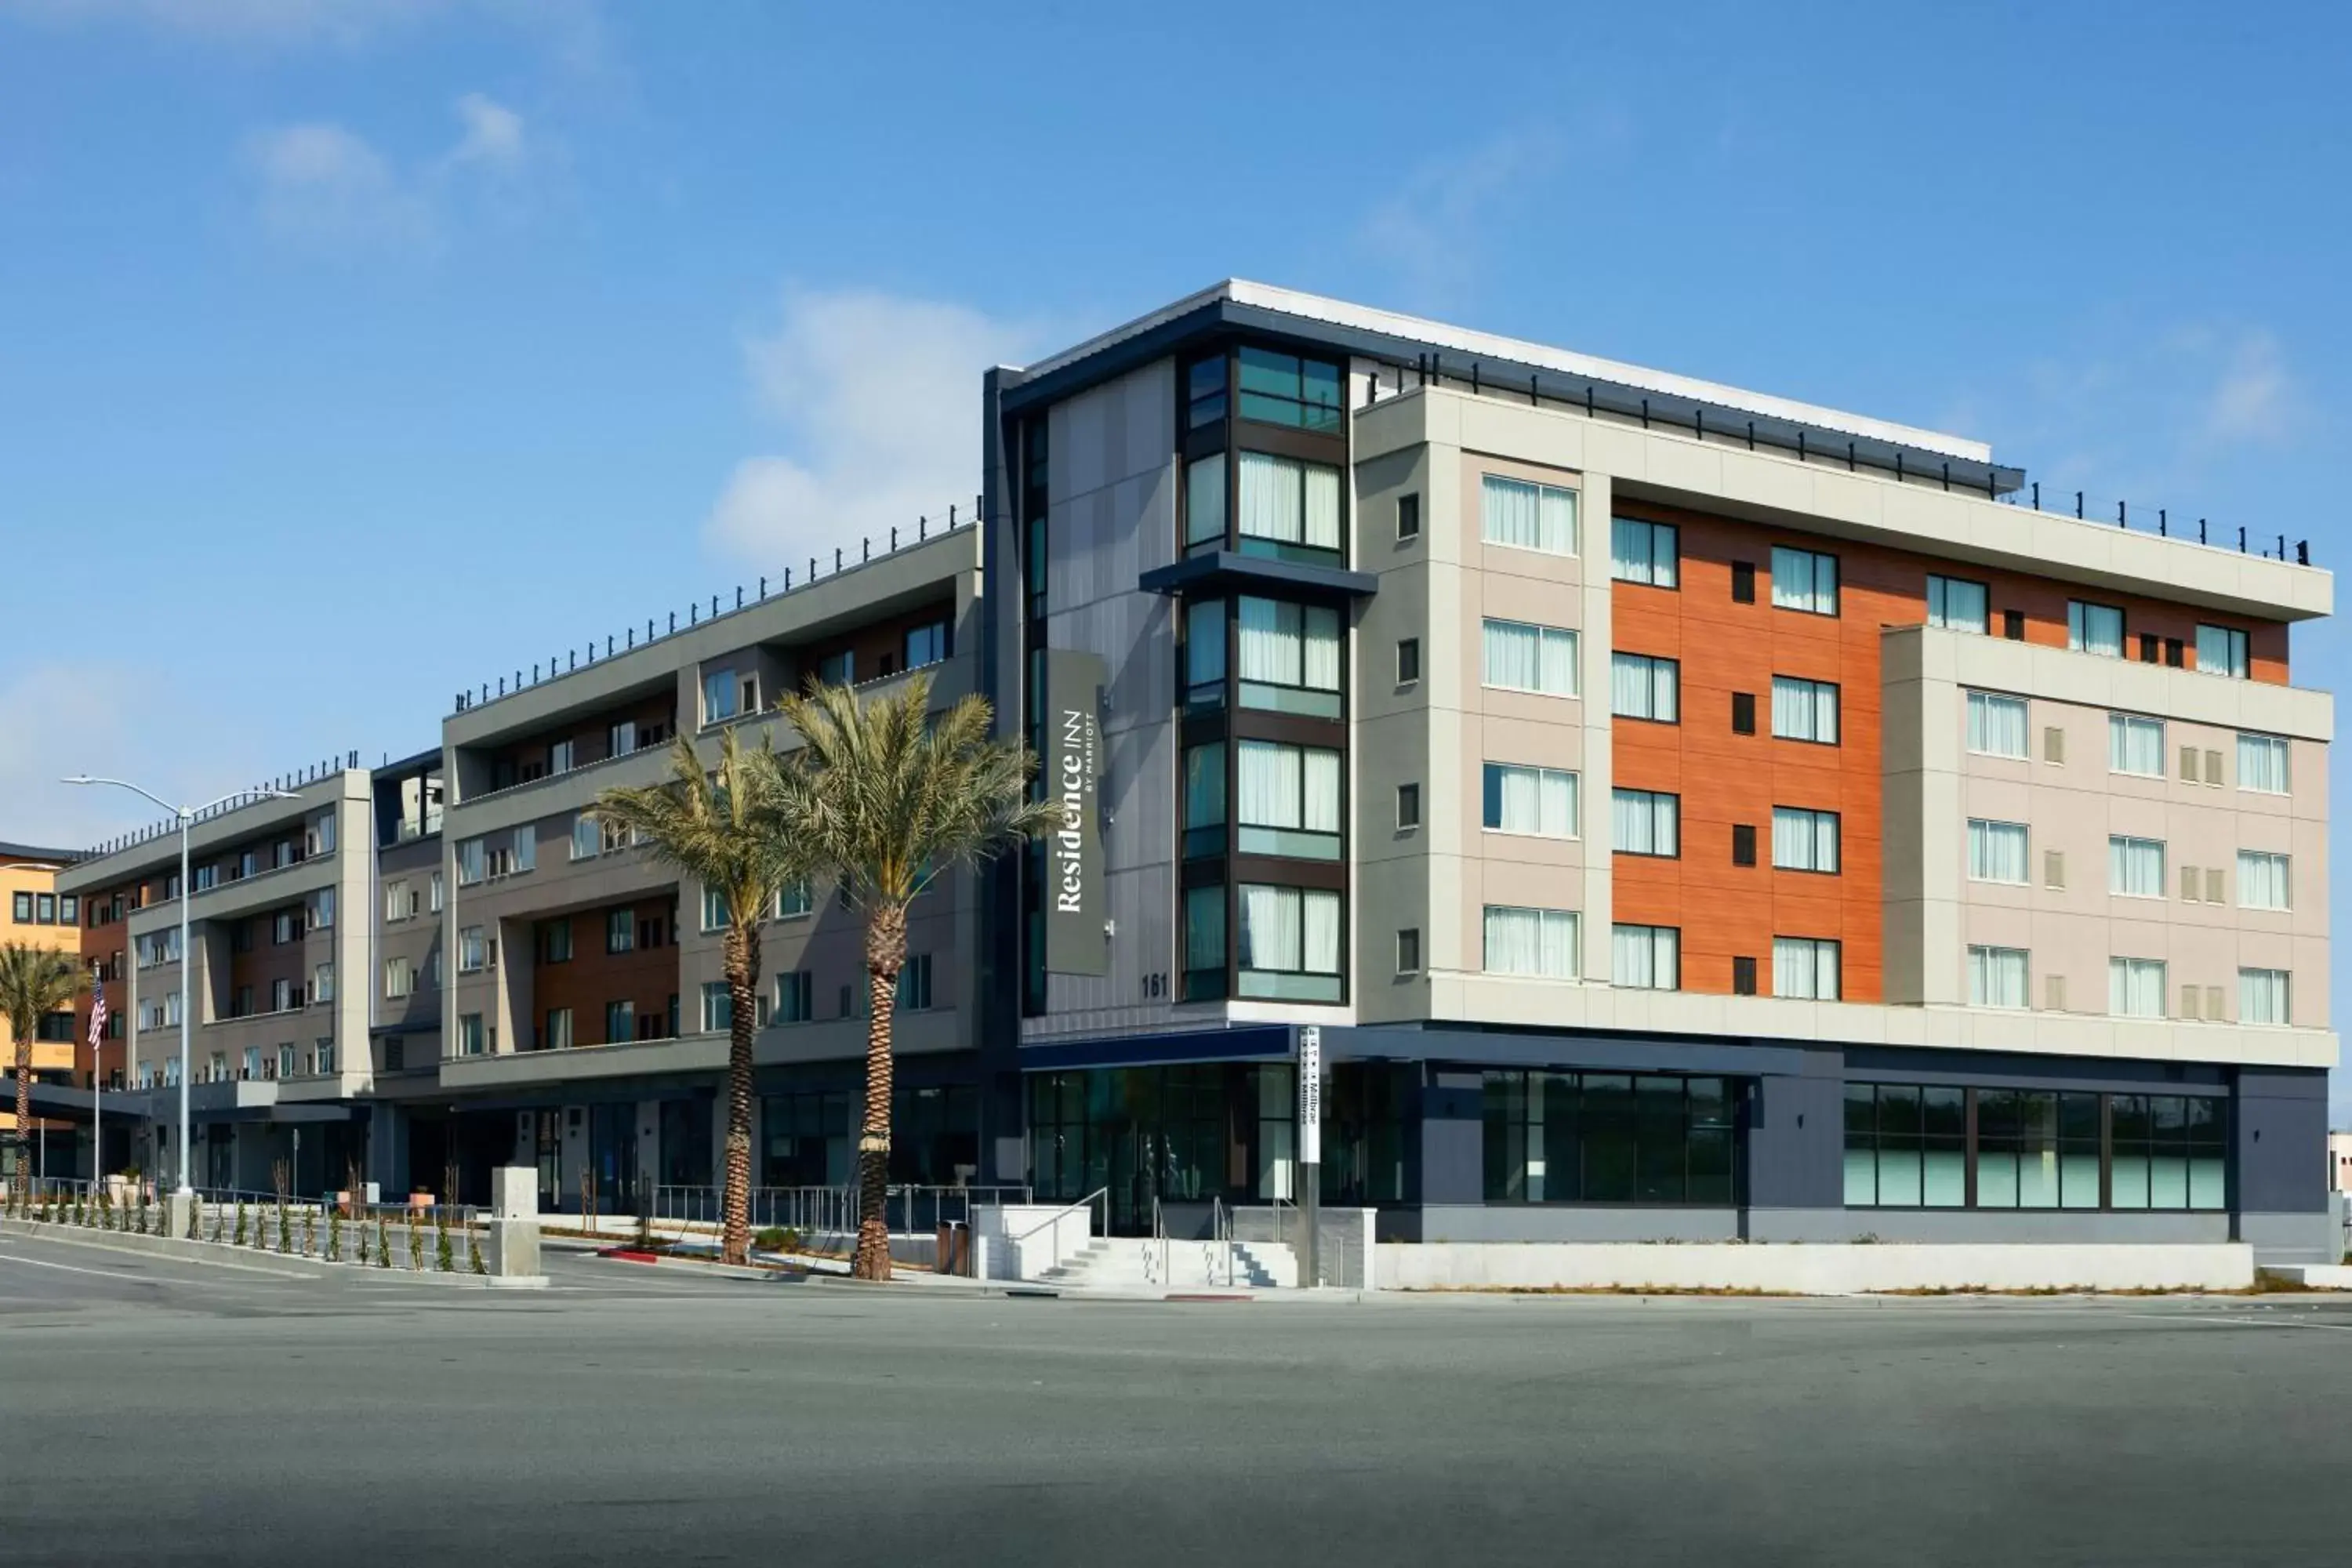 Property Building in Residence Inn by Marriott San Francisco Airport Millbrae Station